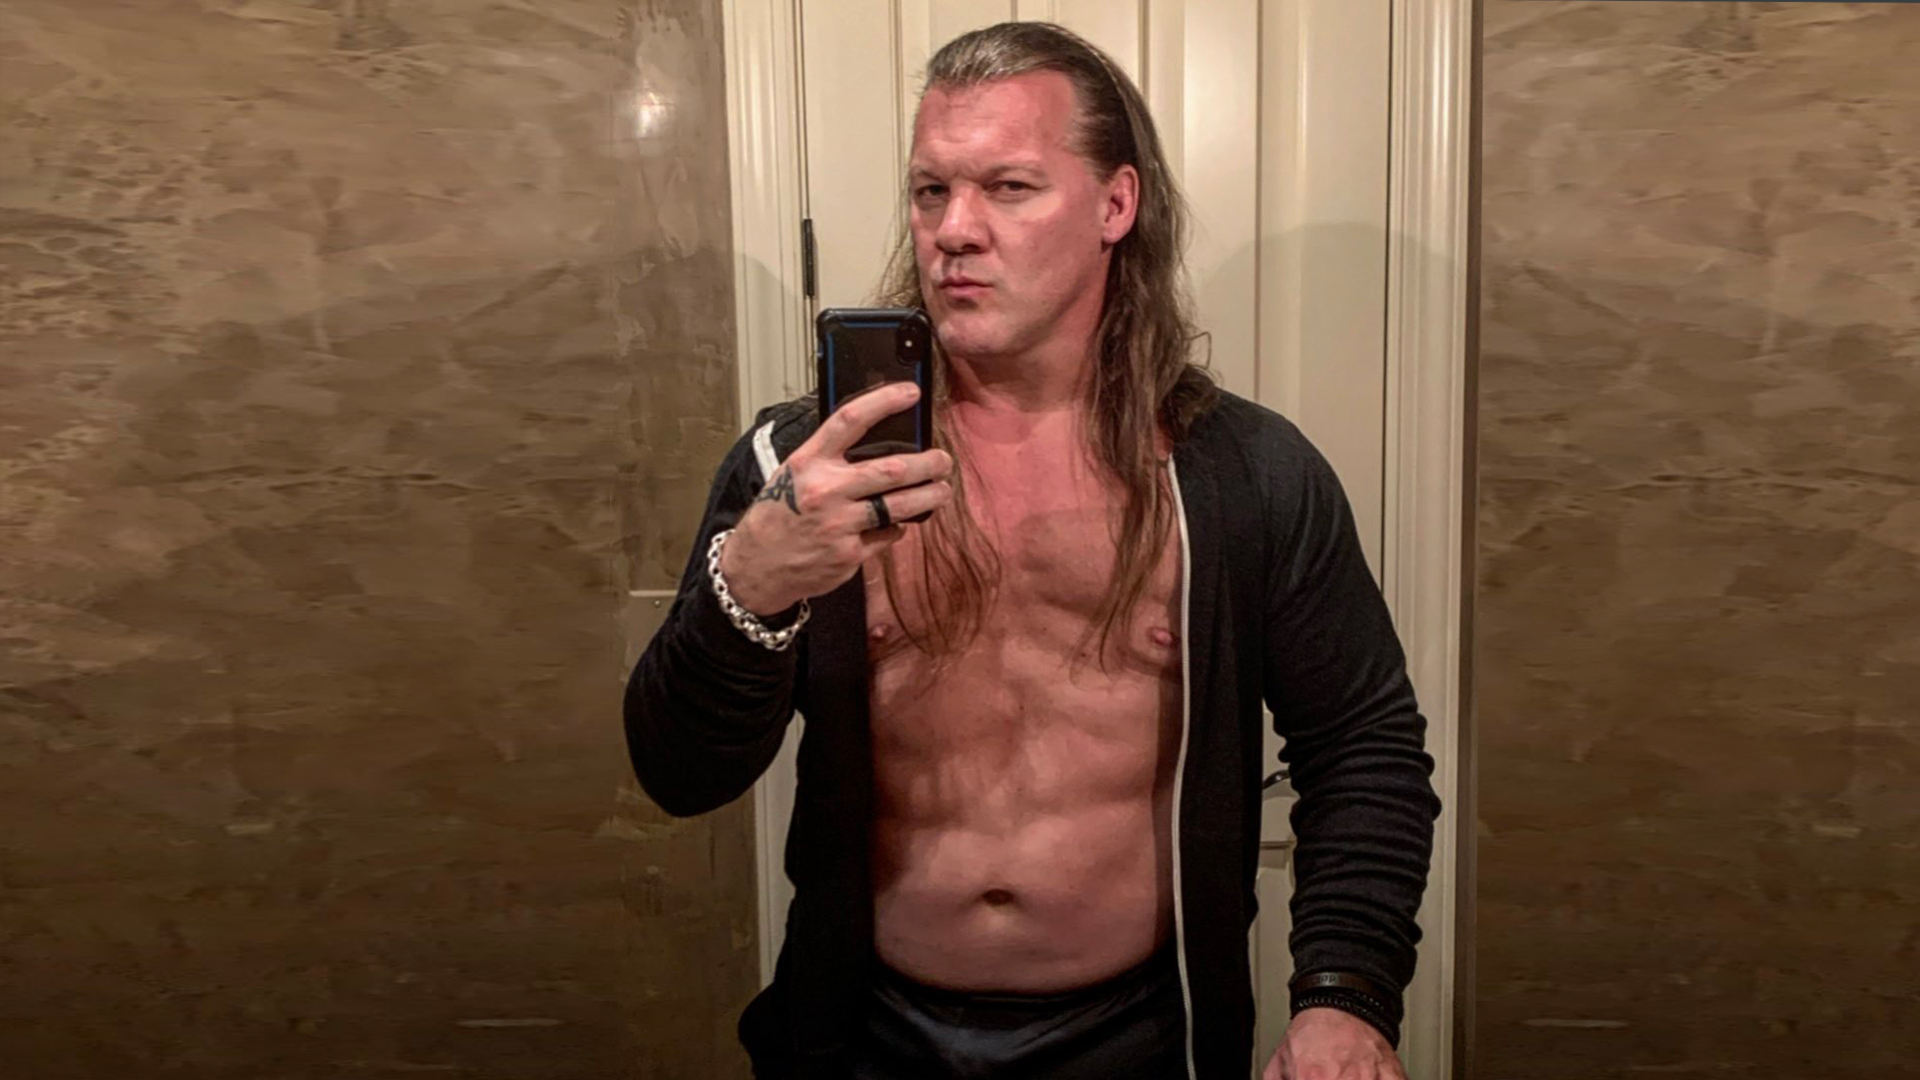 Chris Jericho Comments On His Health After Being Hospitalized